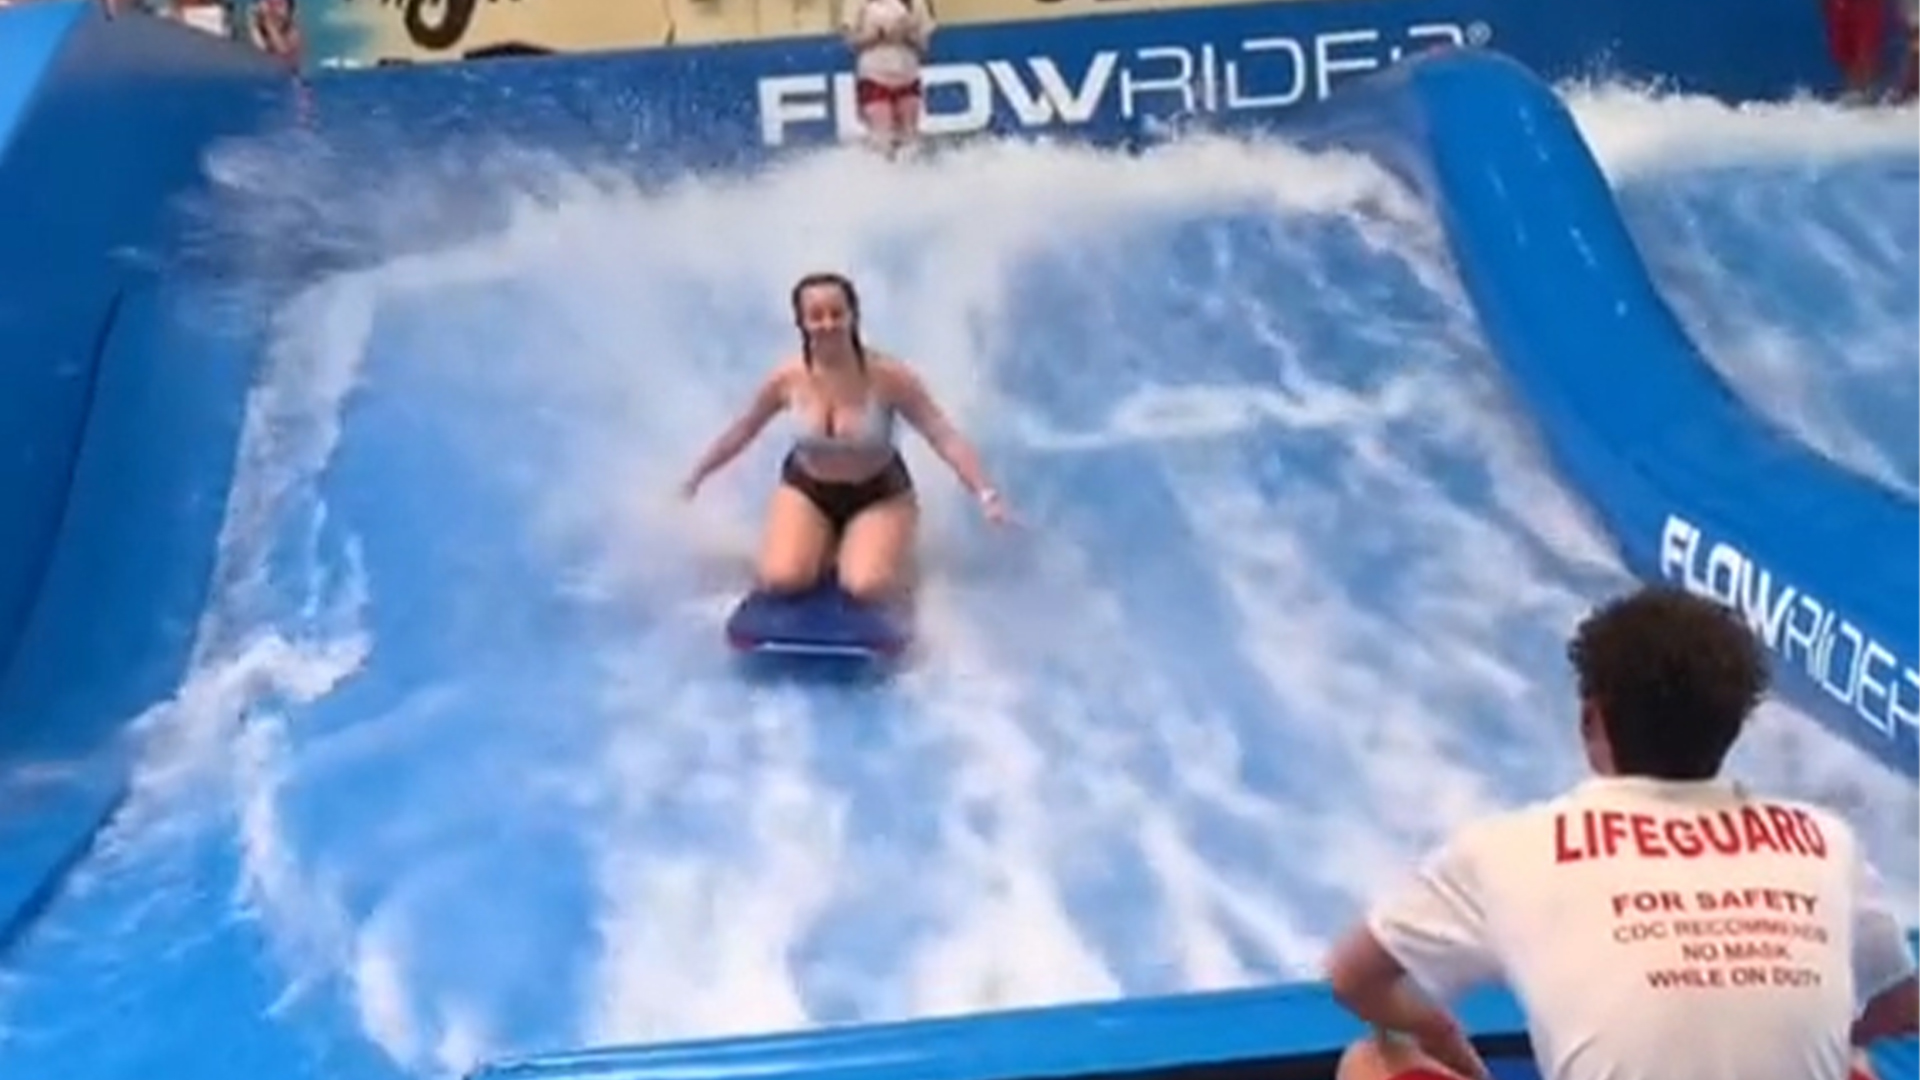 brad vierra recommends water slide bathing suit malfunction pic